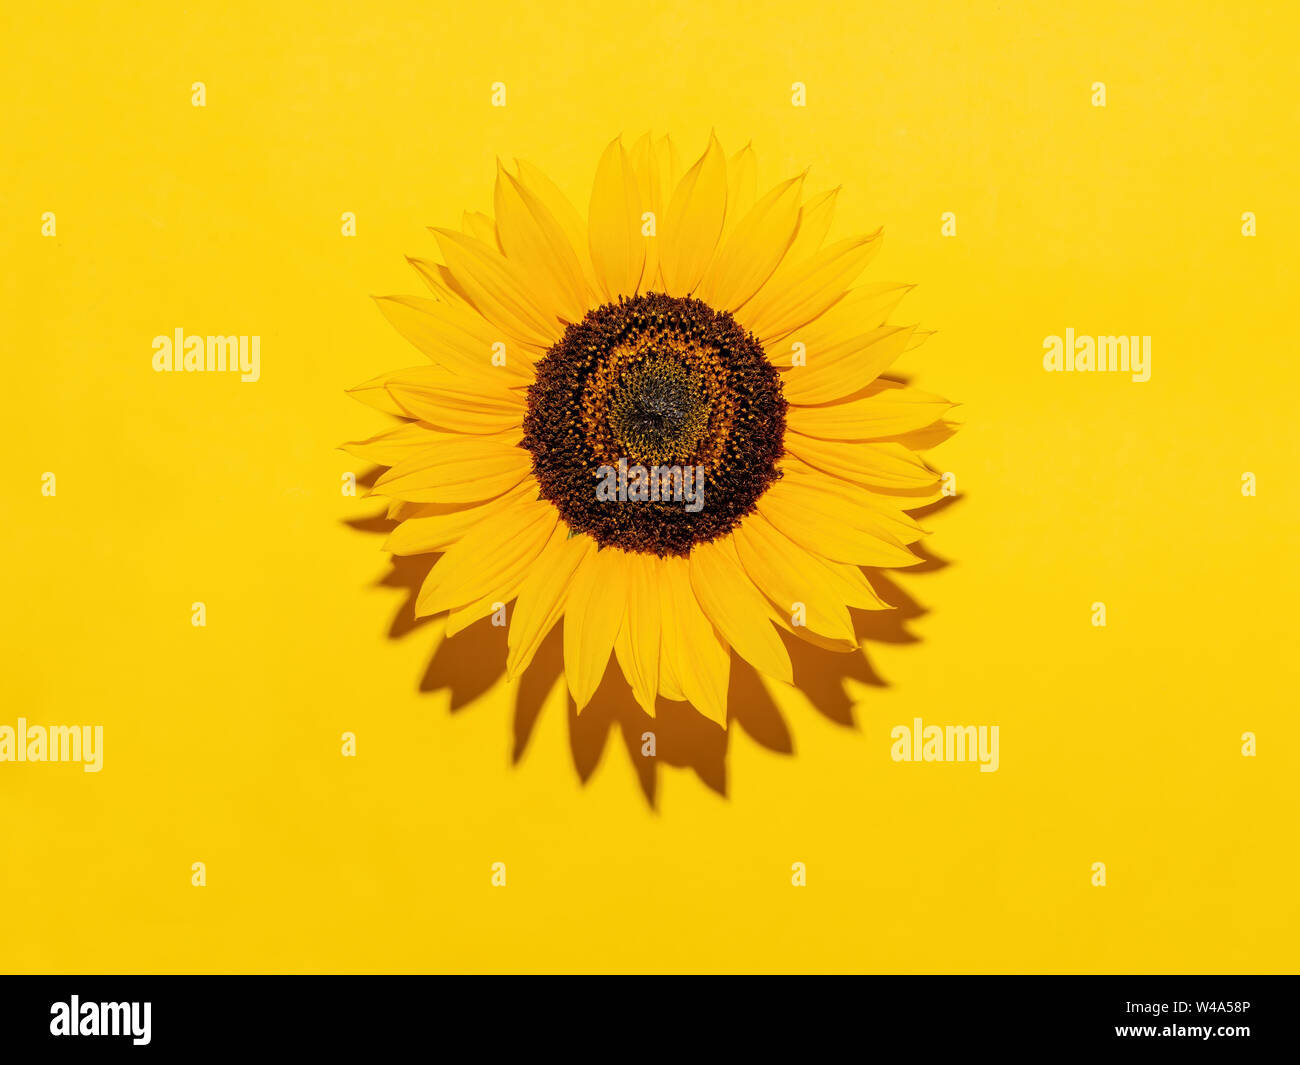 Sunflower flower, on yellow background with copyspace. Harsh light for hot effect. Stock Photo